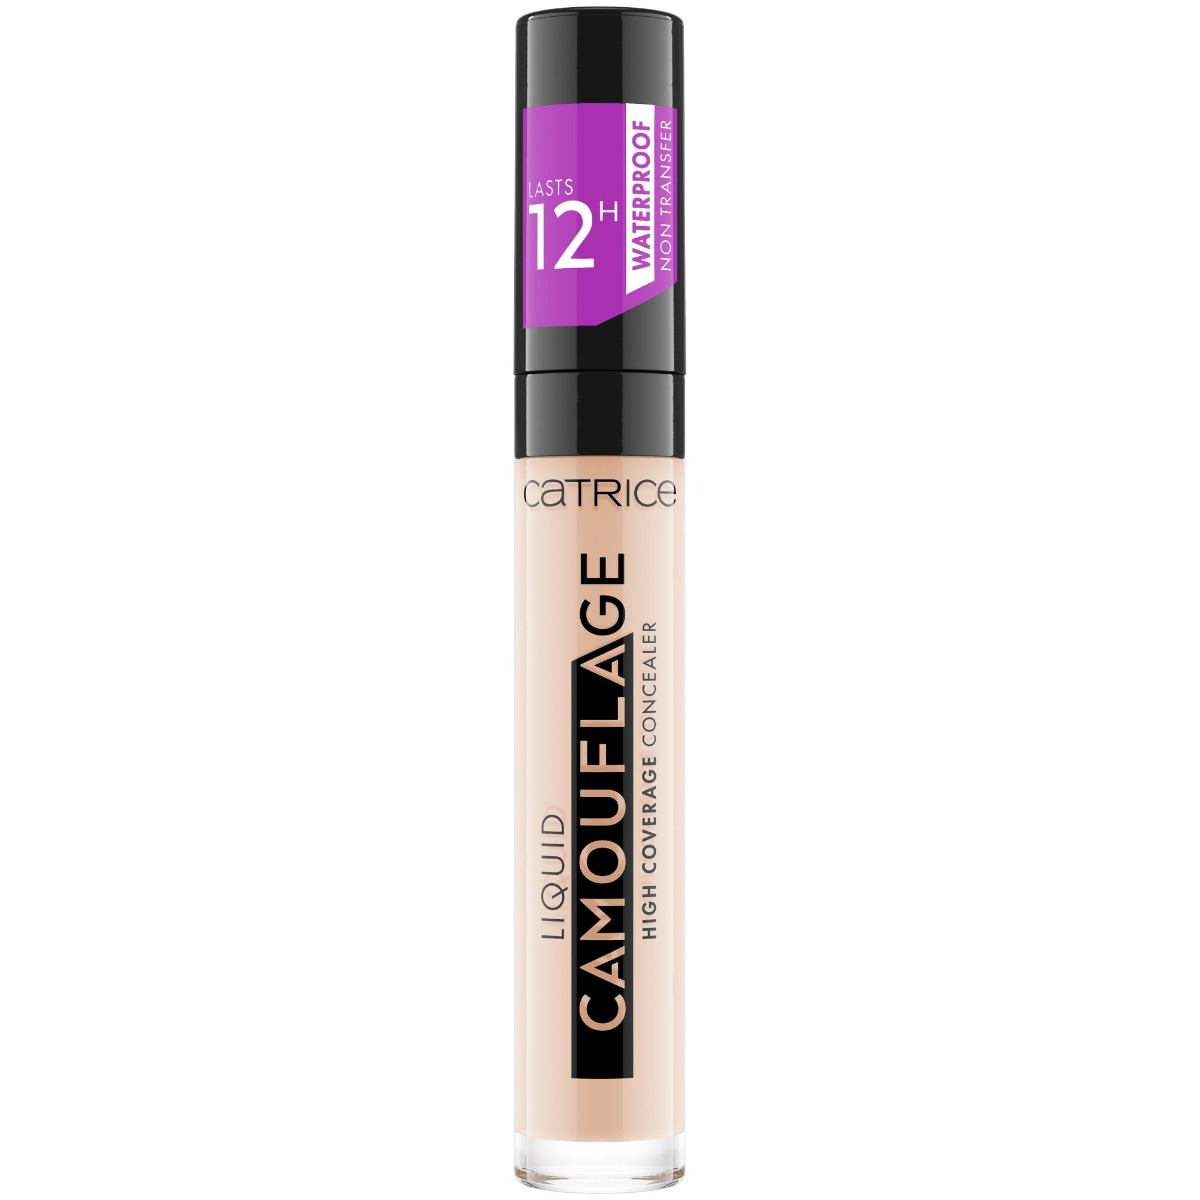 Corector Liquid Camouflage High Coverage Concealer 001 - Fair Ivory, 5ml, Catrice